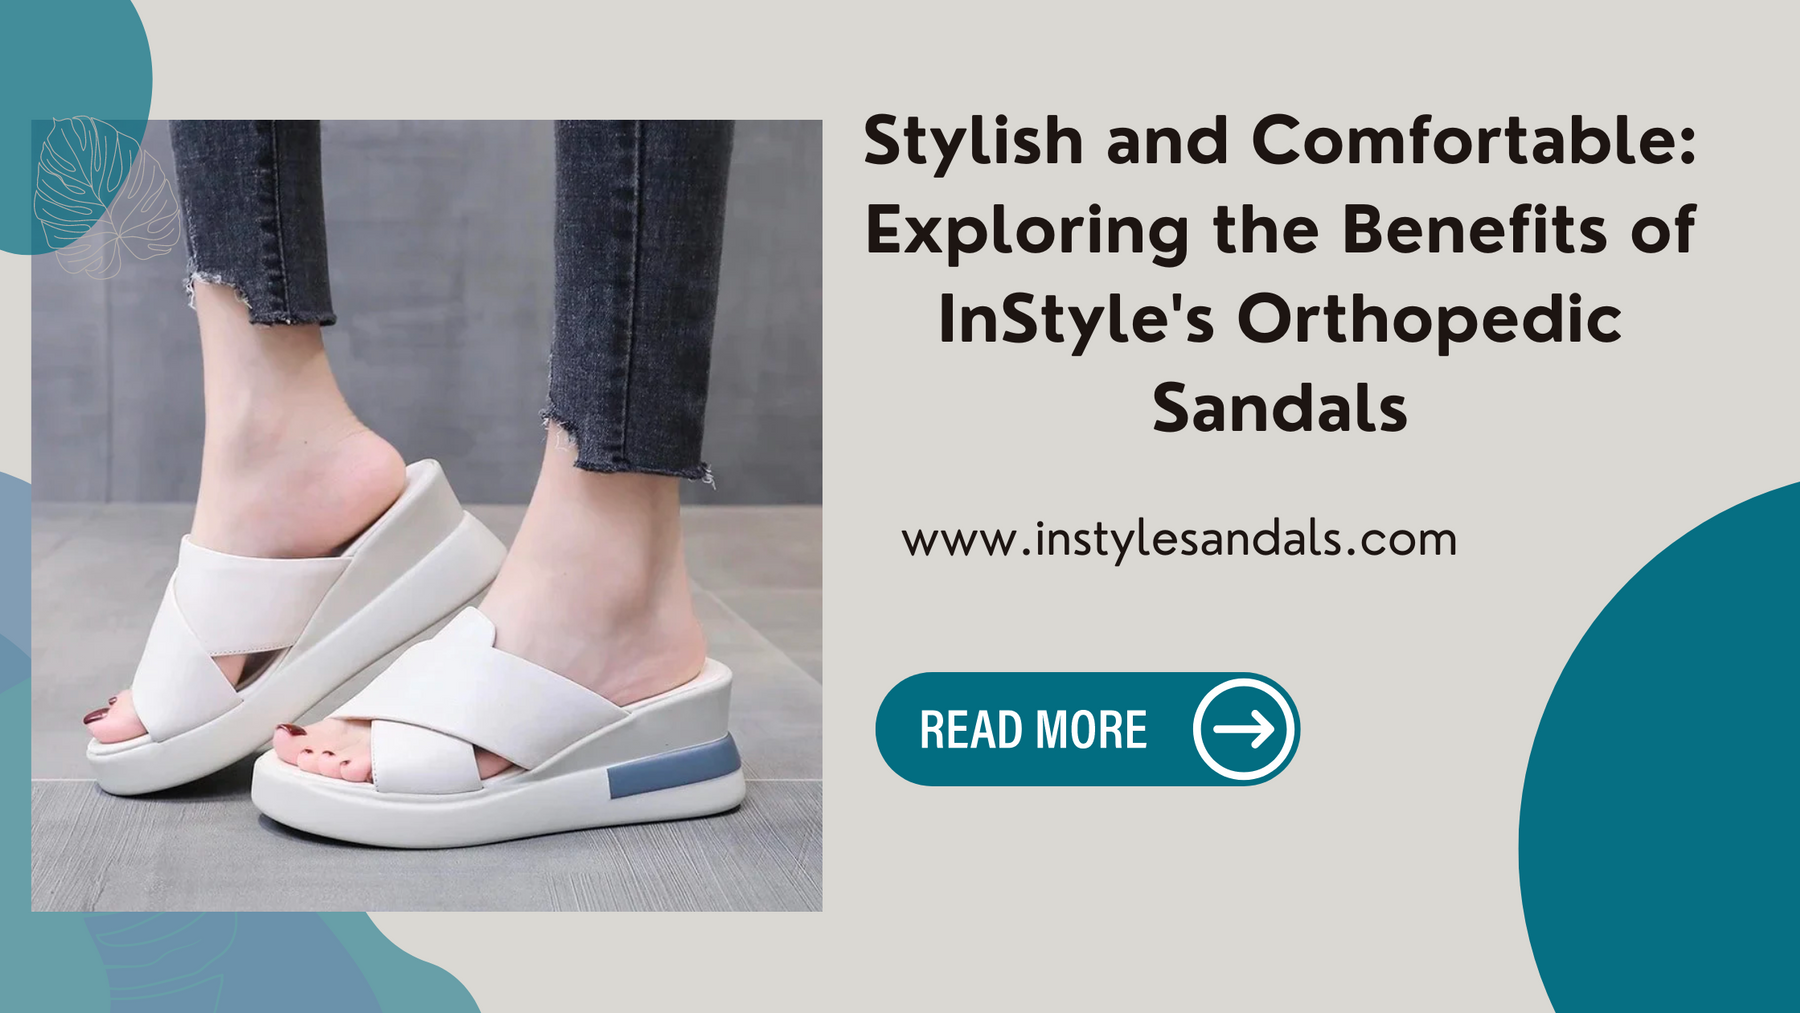 Step into Style and Comfort with InStyle's Orthopedic Sandals